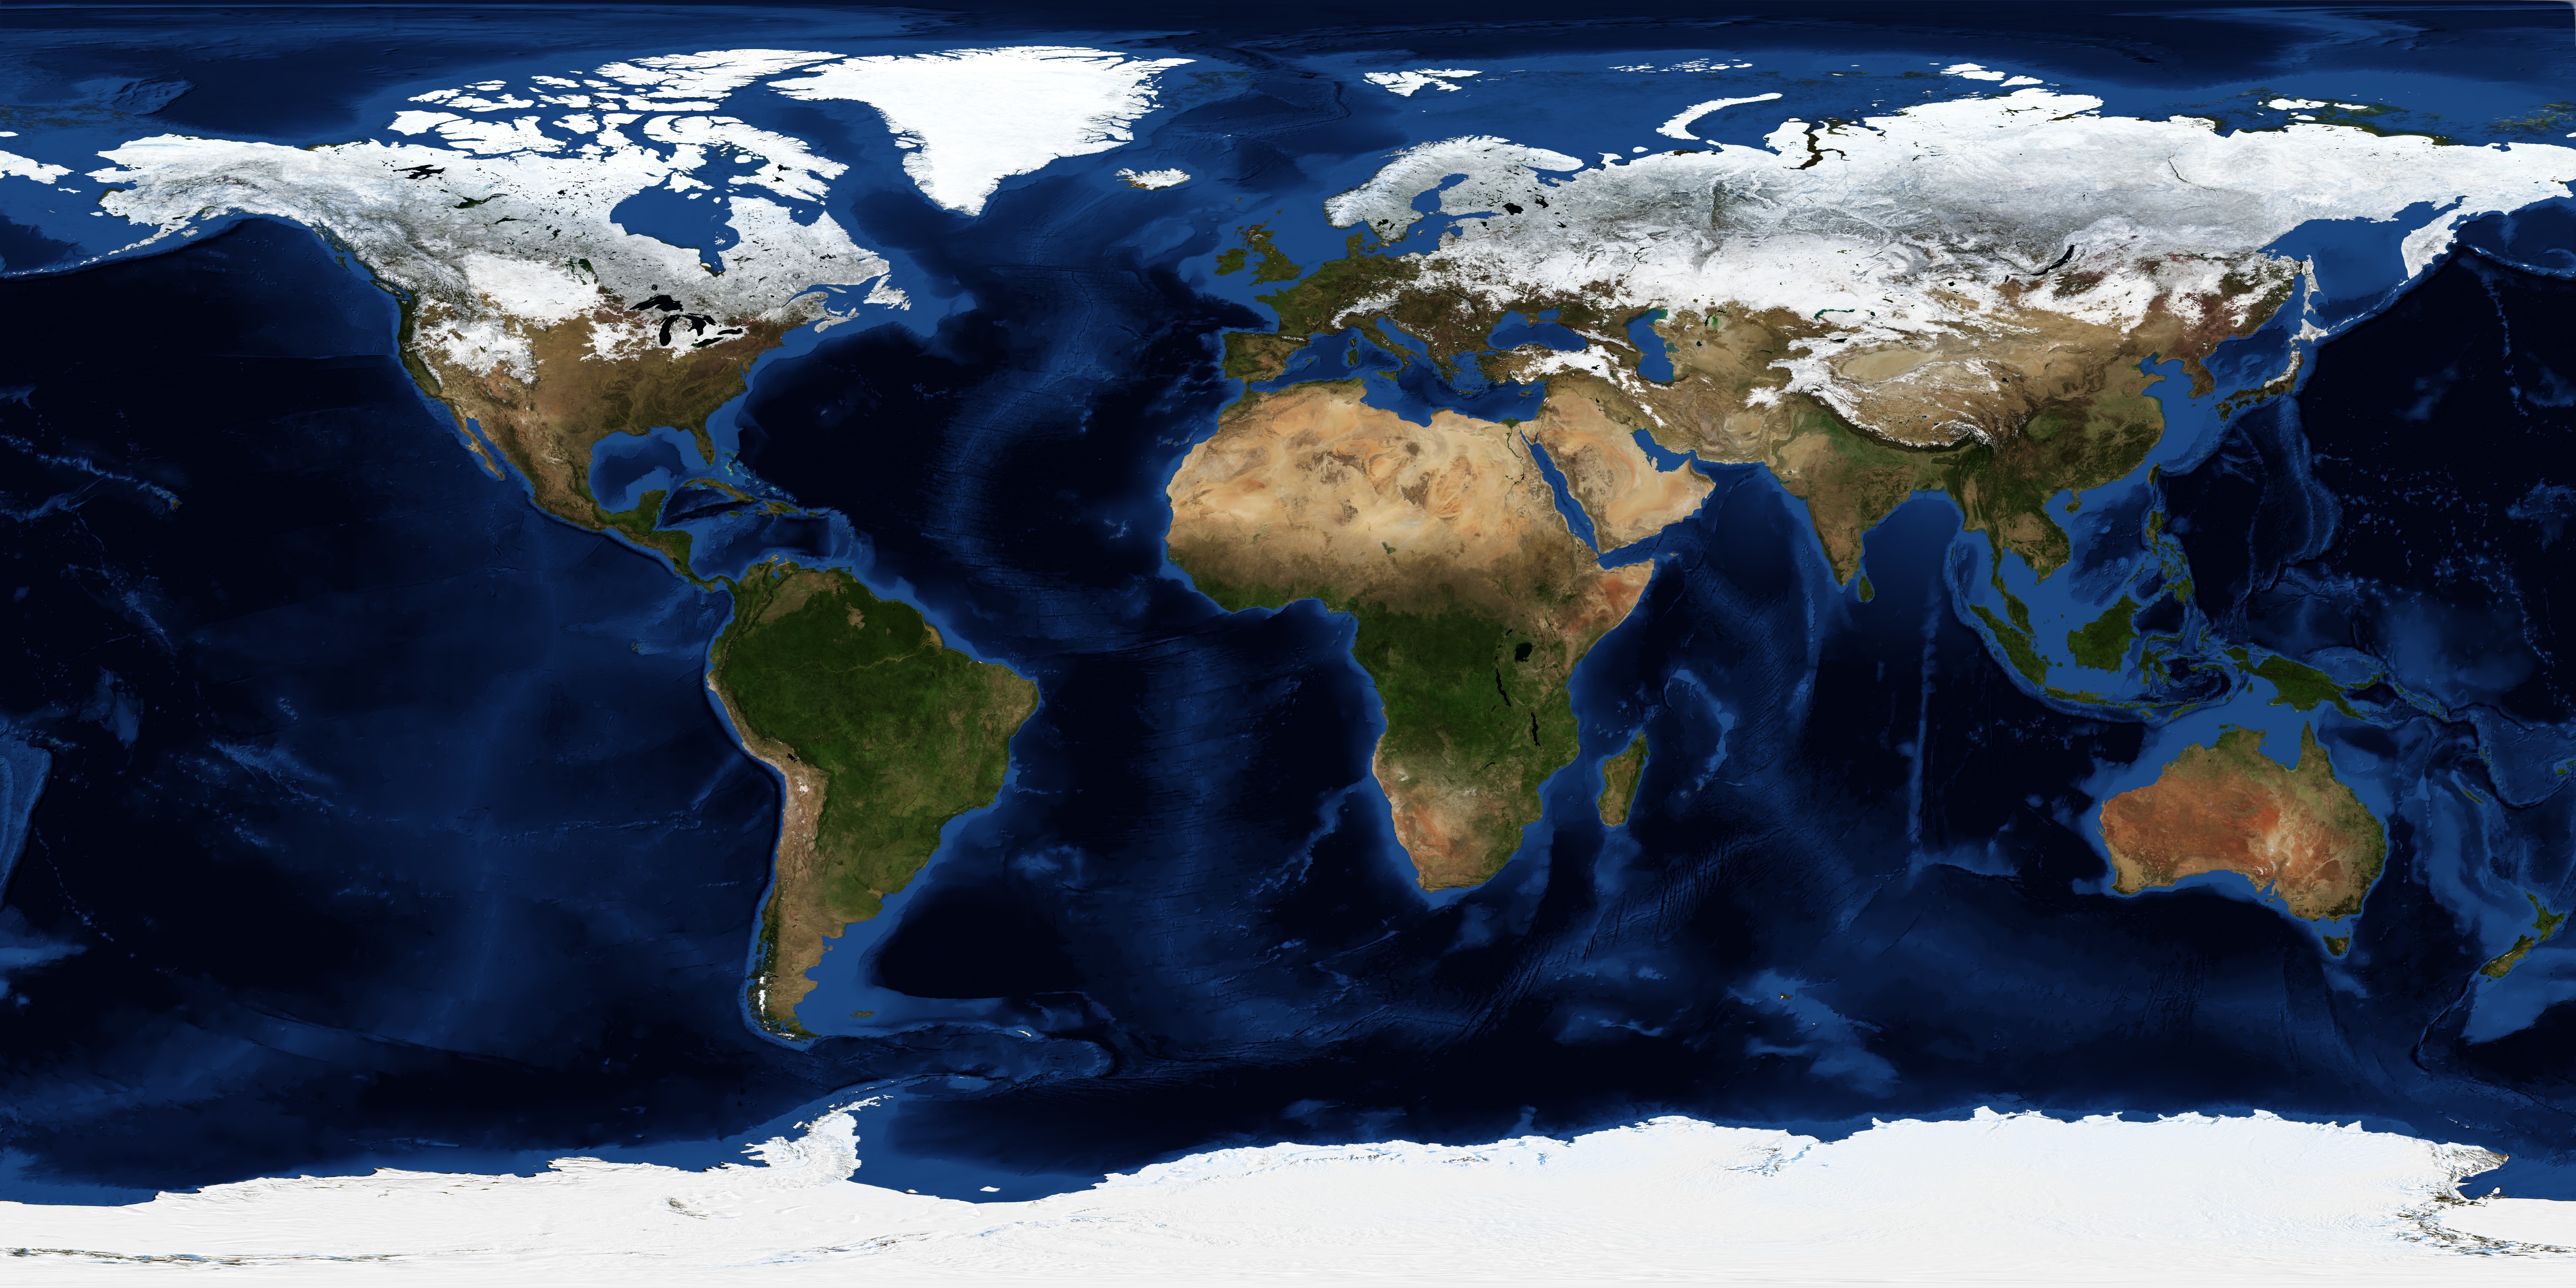 January, Blue Marble Next Generation w/ Topography and Bathymetry - related image preview